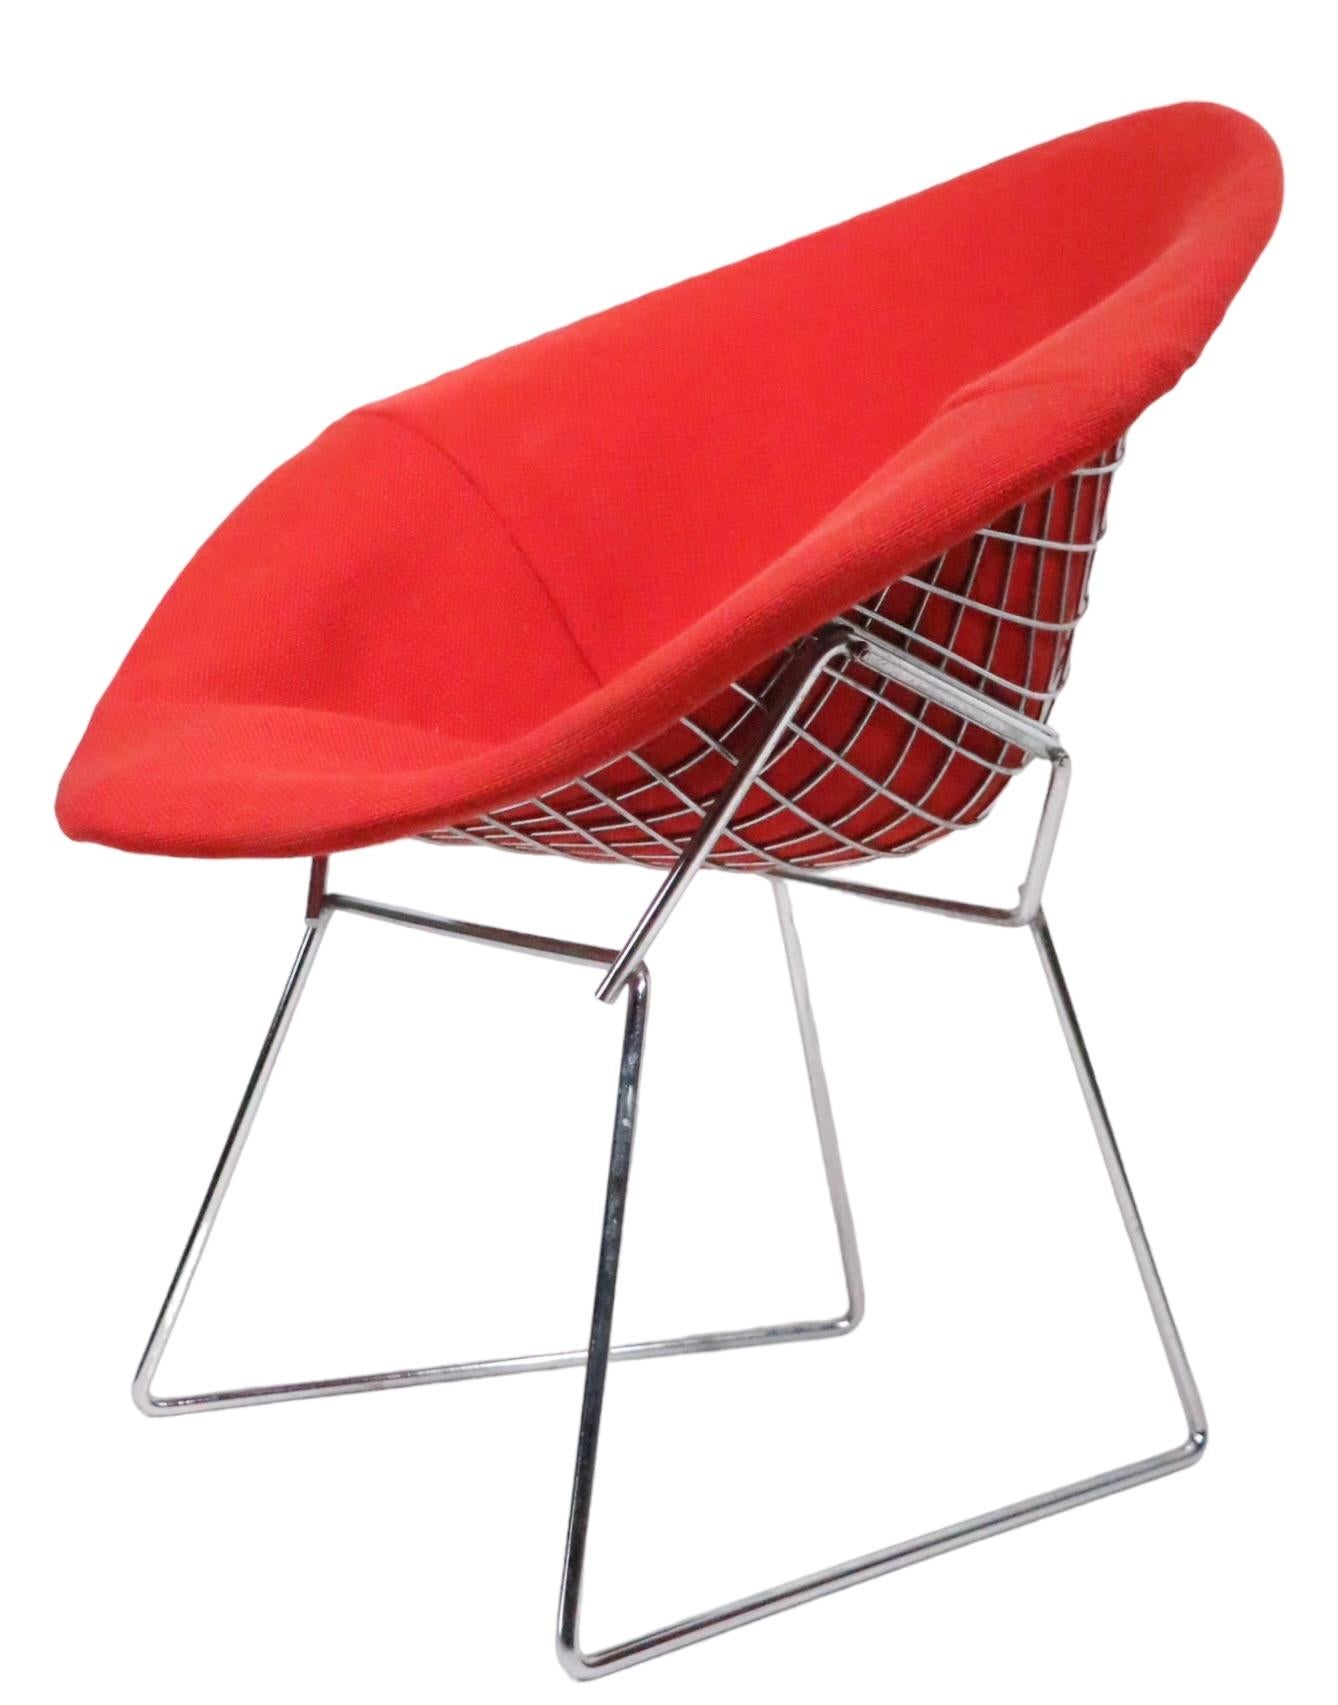 Bertoia for Knoll Chrome Diamond Chair with Full Pad Cover C 1960/1970s For Sale 6